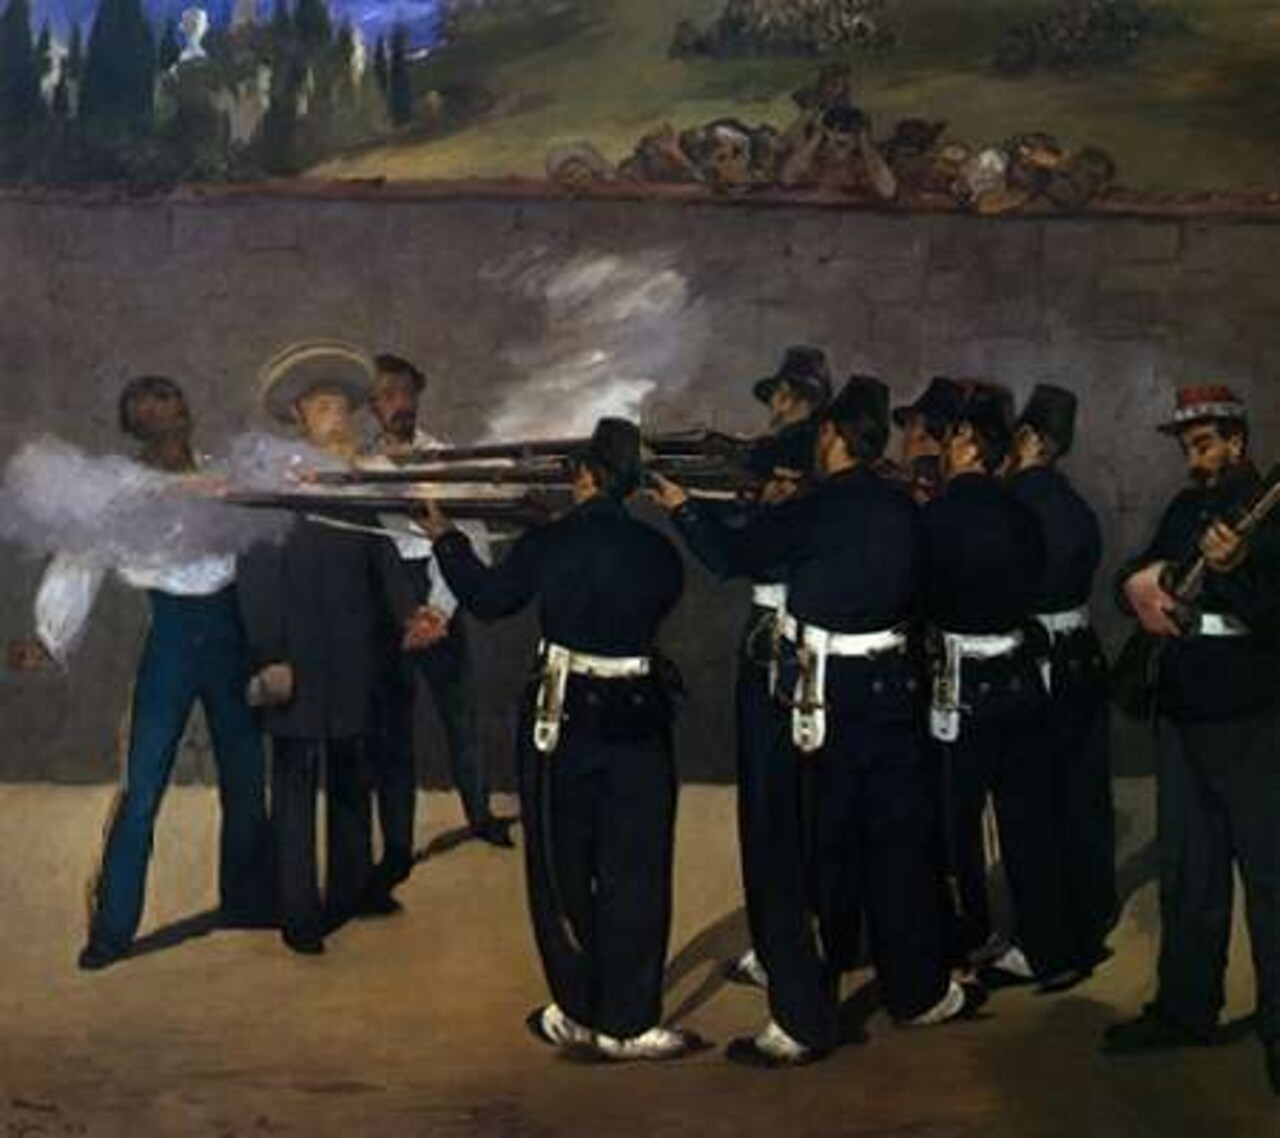 Execution of Emperor Maximilian Poster Print by Edouard Manet - Item # VARPDX373495